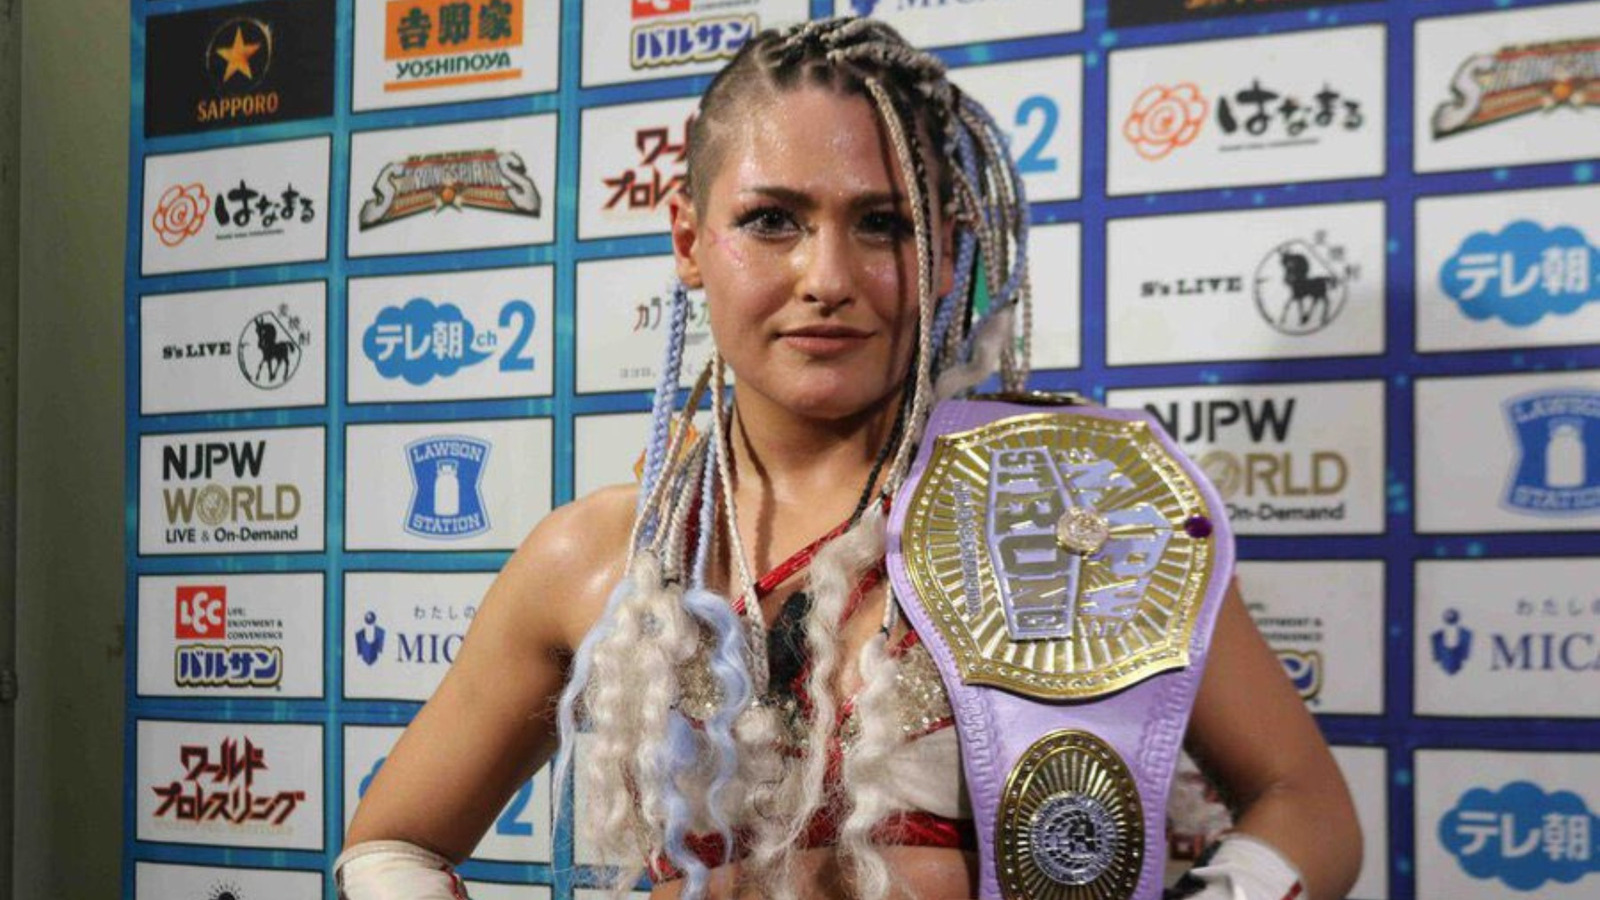 Backstage Update On NJPW/STARDOM Star Giulia Potentially Signing With WWE